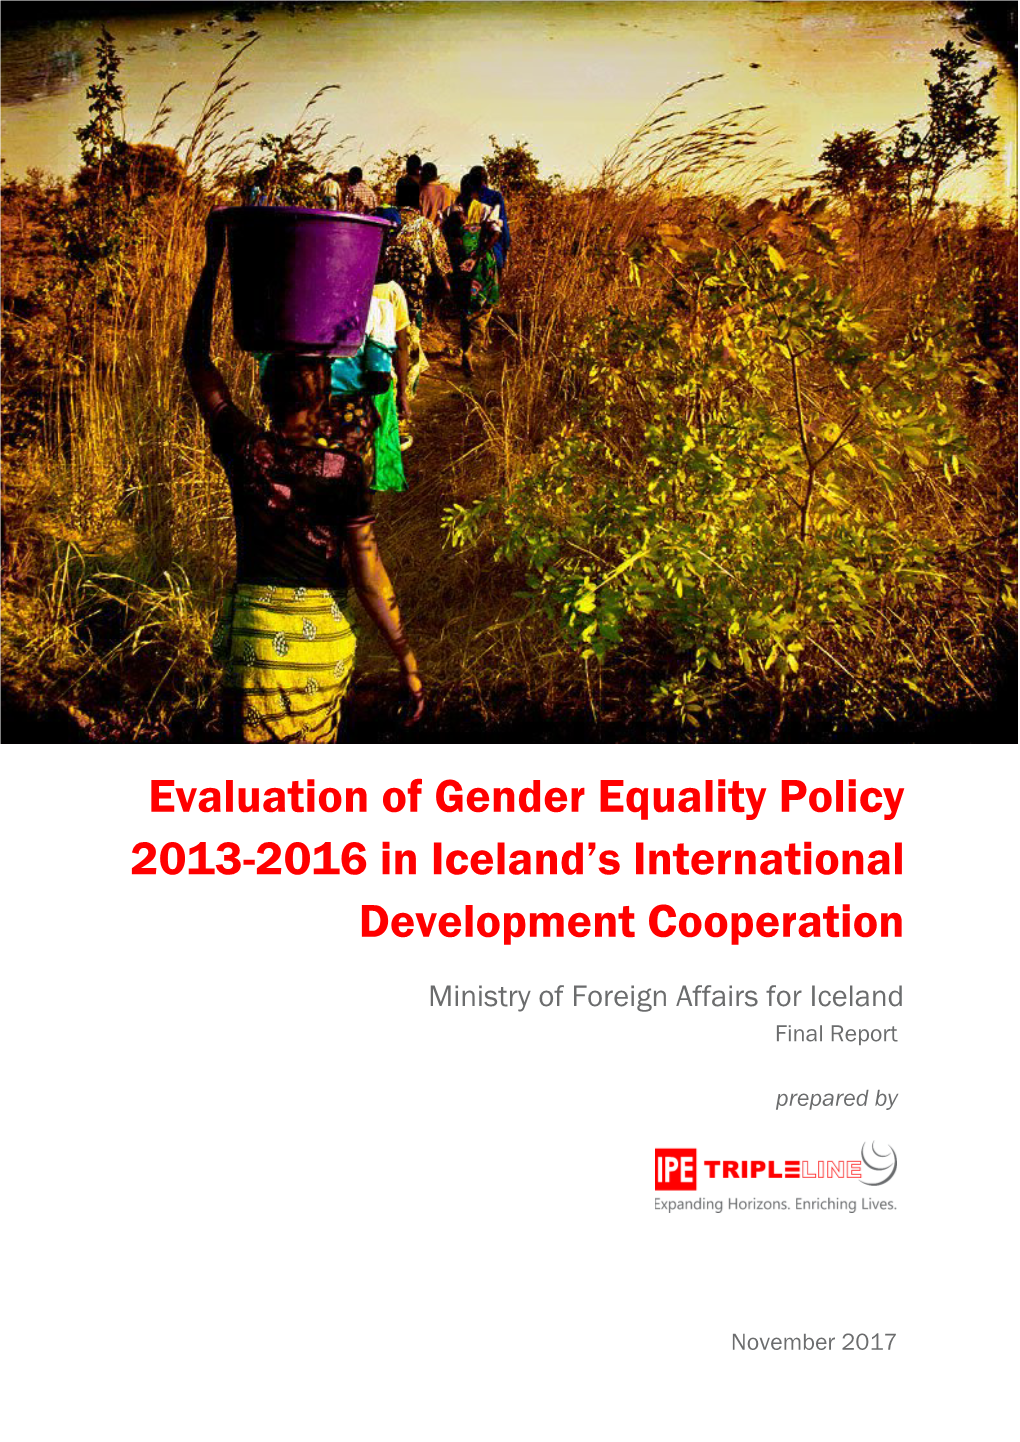 Evaluation of Gender Equality Policy 2013-2016 in Iceland's International Development Cooperation